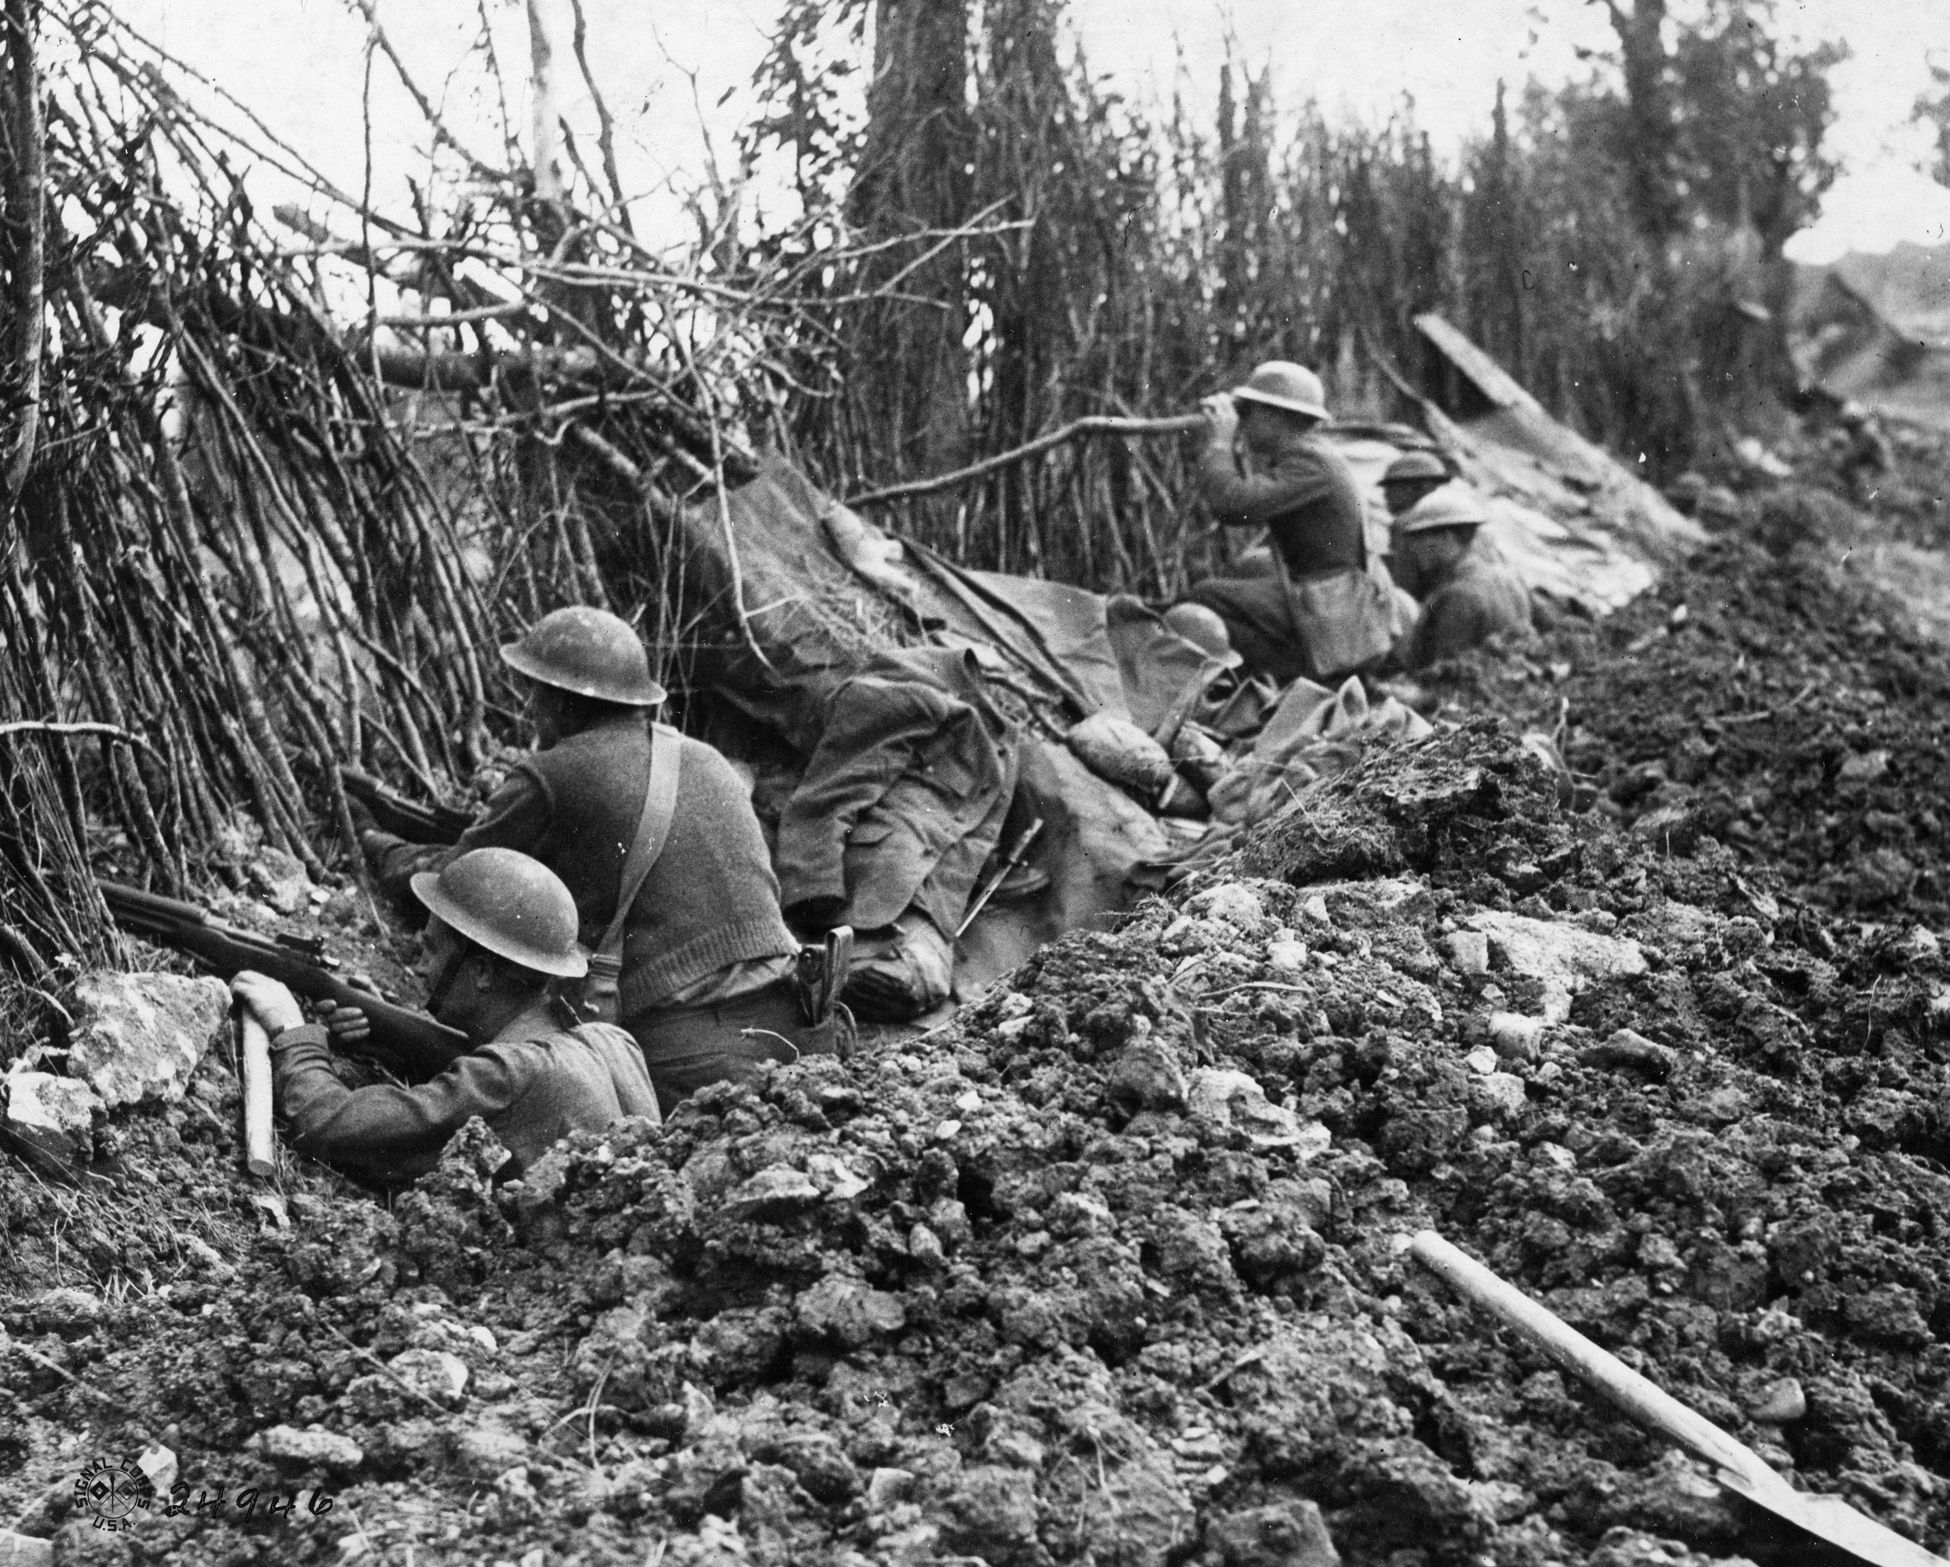 Armed with Enfields, American doughboys man an abandoned German position in the Meuse Valley north of Verdun.